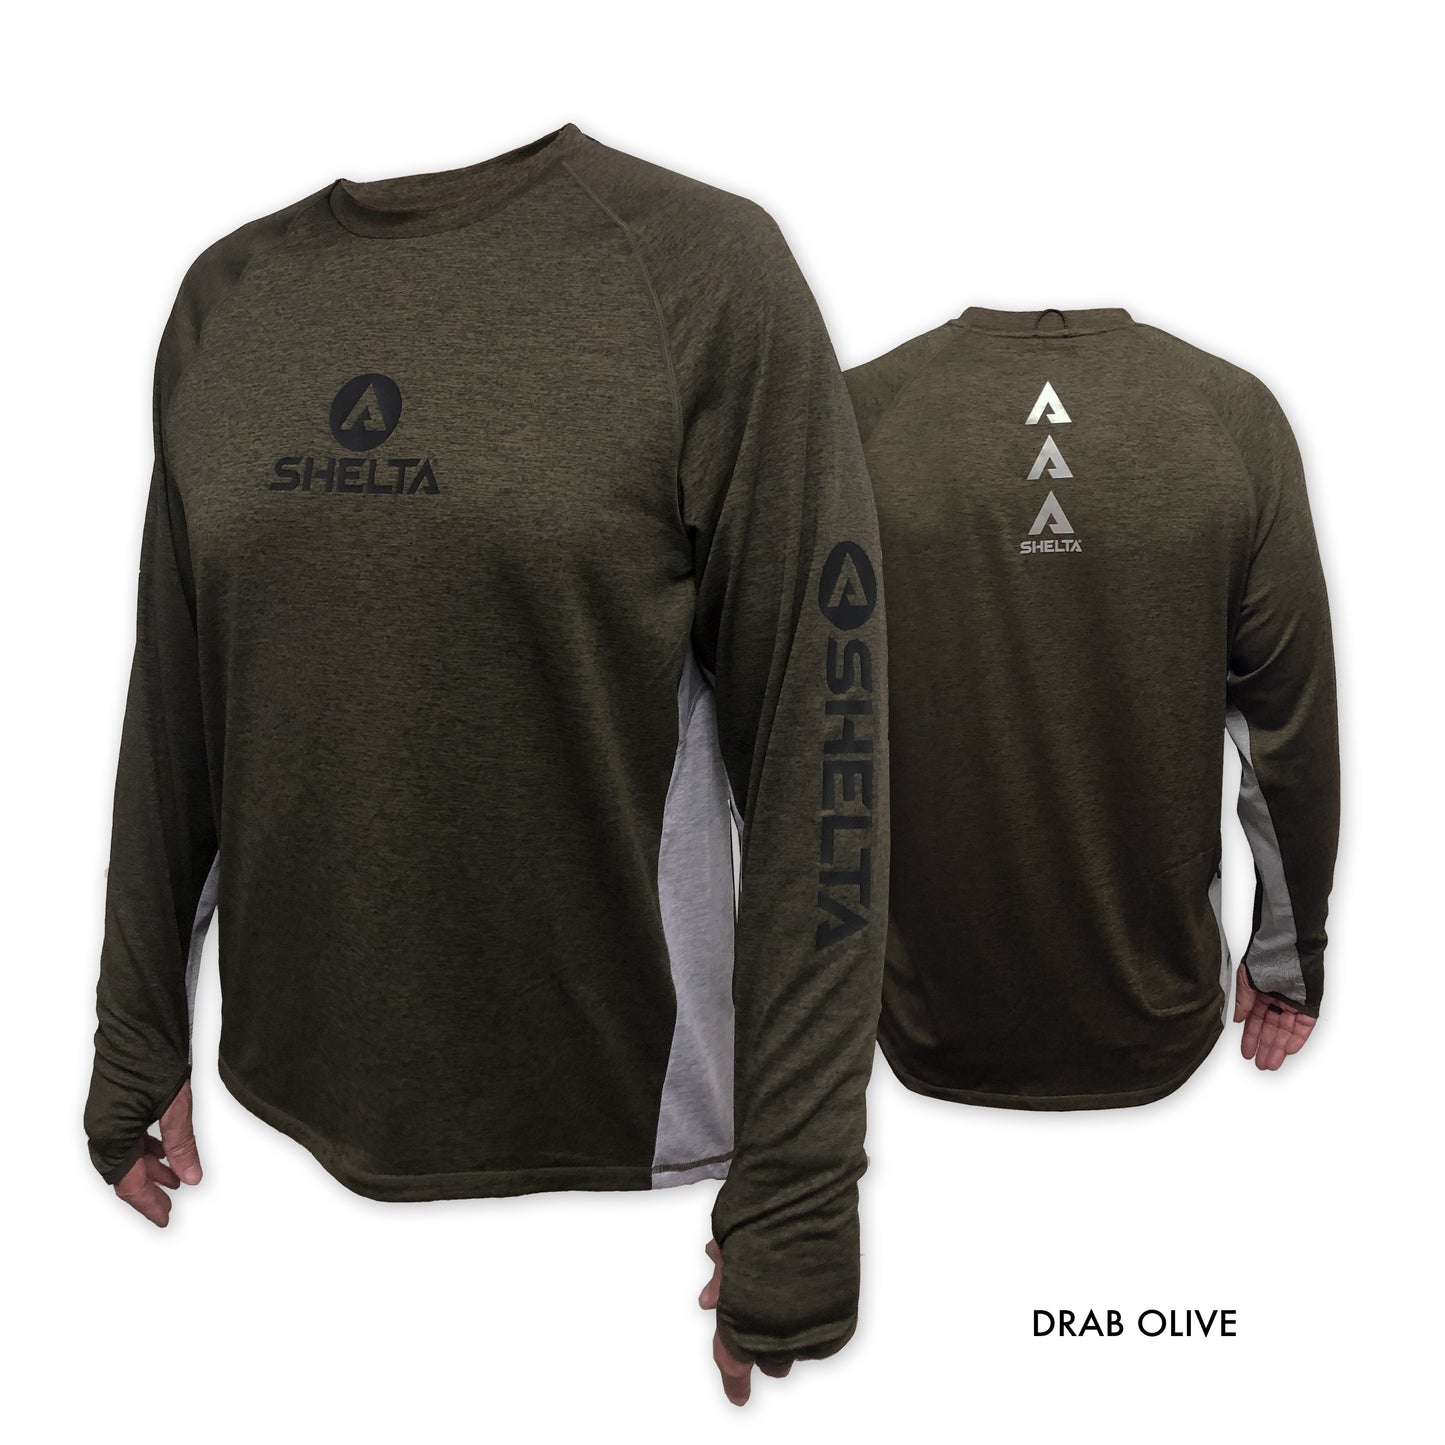 The Aquaterra Crew neck in Drab Olive is engineered & built with sun protection, function, and durability in mind.  Truly amphibious these technical tops work as well in the water as on land.  Offering features consistent with Shelta core values and innovation goals.   UPF 50+ UV protection, the highest rating given.  Blocks 98% of UVA/UVB radiation.